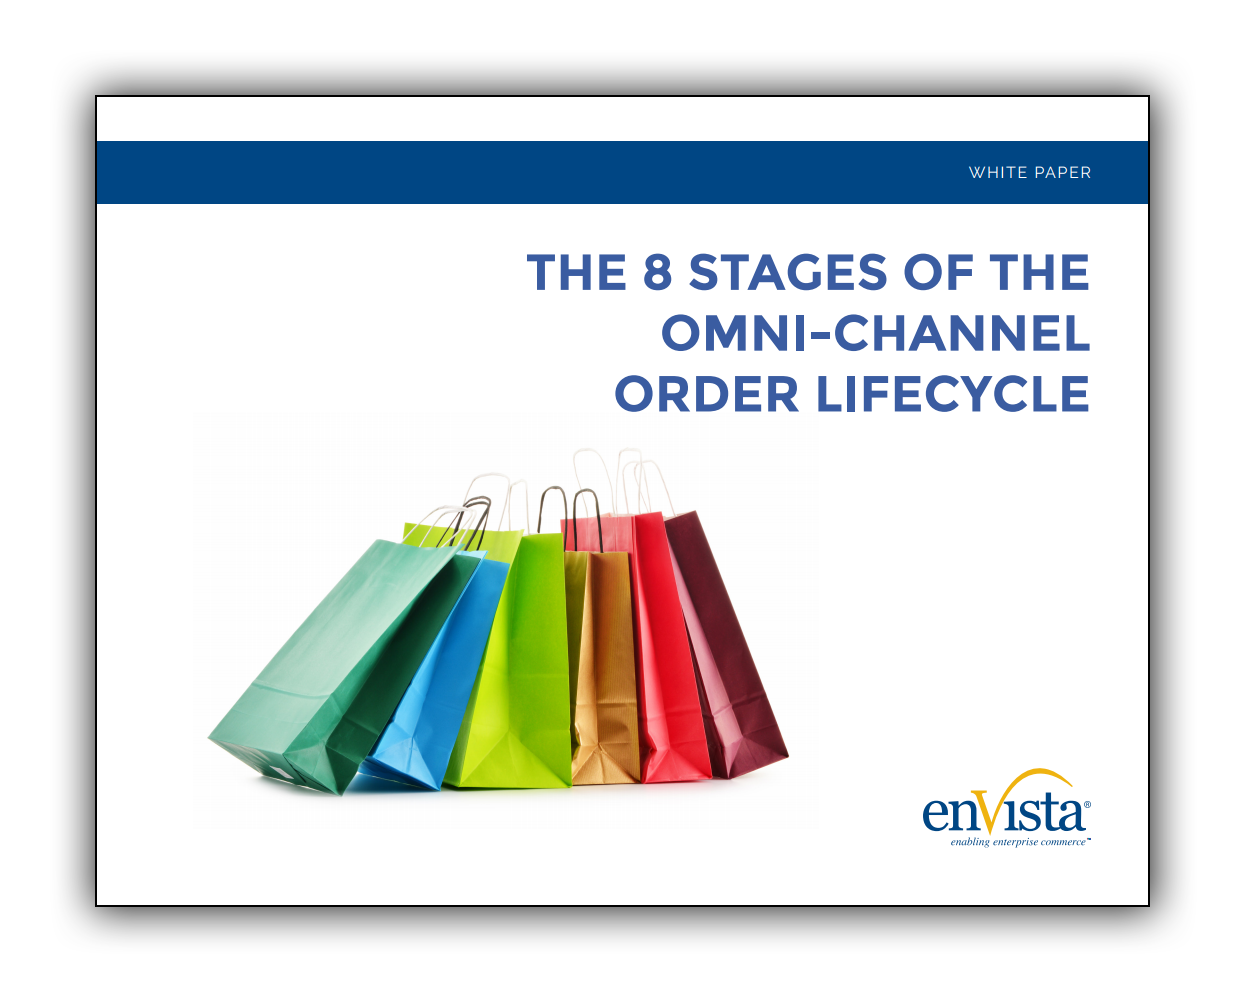 Image_8-stages-of-the-omni-channel-order-lifecycle.png